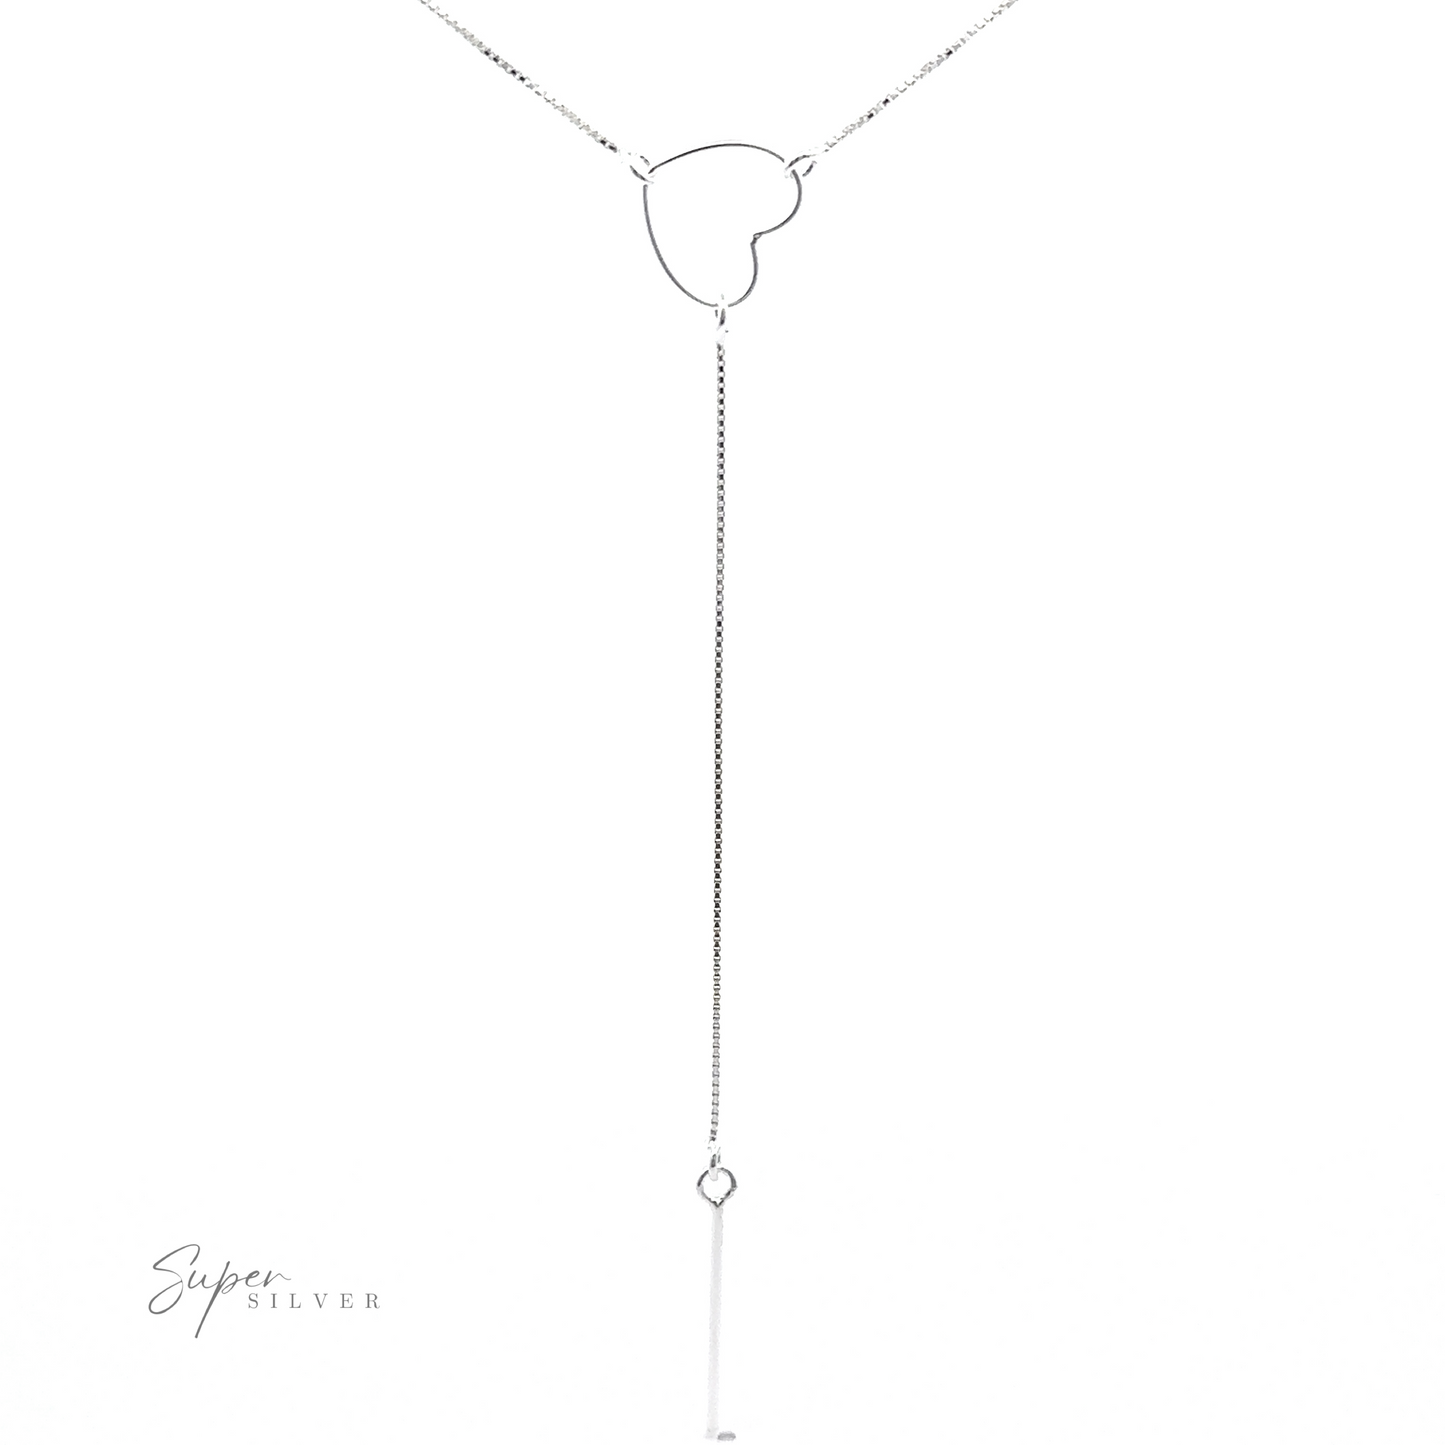 
                  
                    A sterling silver necklace featuring a heart-shaped pendant at the center, from which a vertical chain extends downwards. This dainty necklace has a small cylindrical element at the end and proudly bears the "Open Heart Lariat Necklace" logo, making it a charming heart lariat necklace.
                  
                